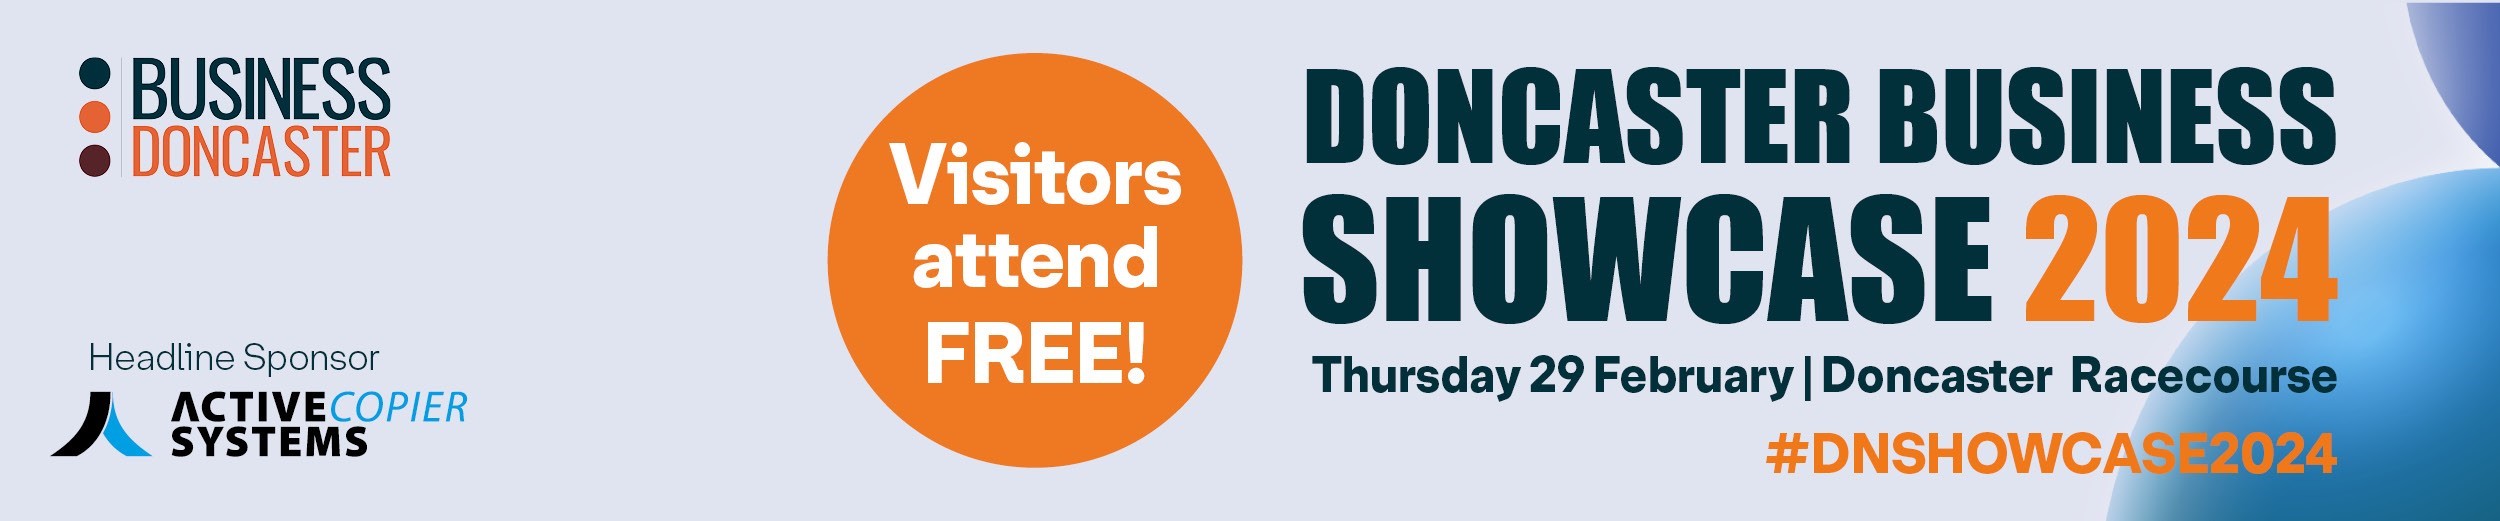 Doncaster Business Showcase 2024 on 29 February at Doncaster Racecourse